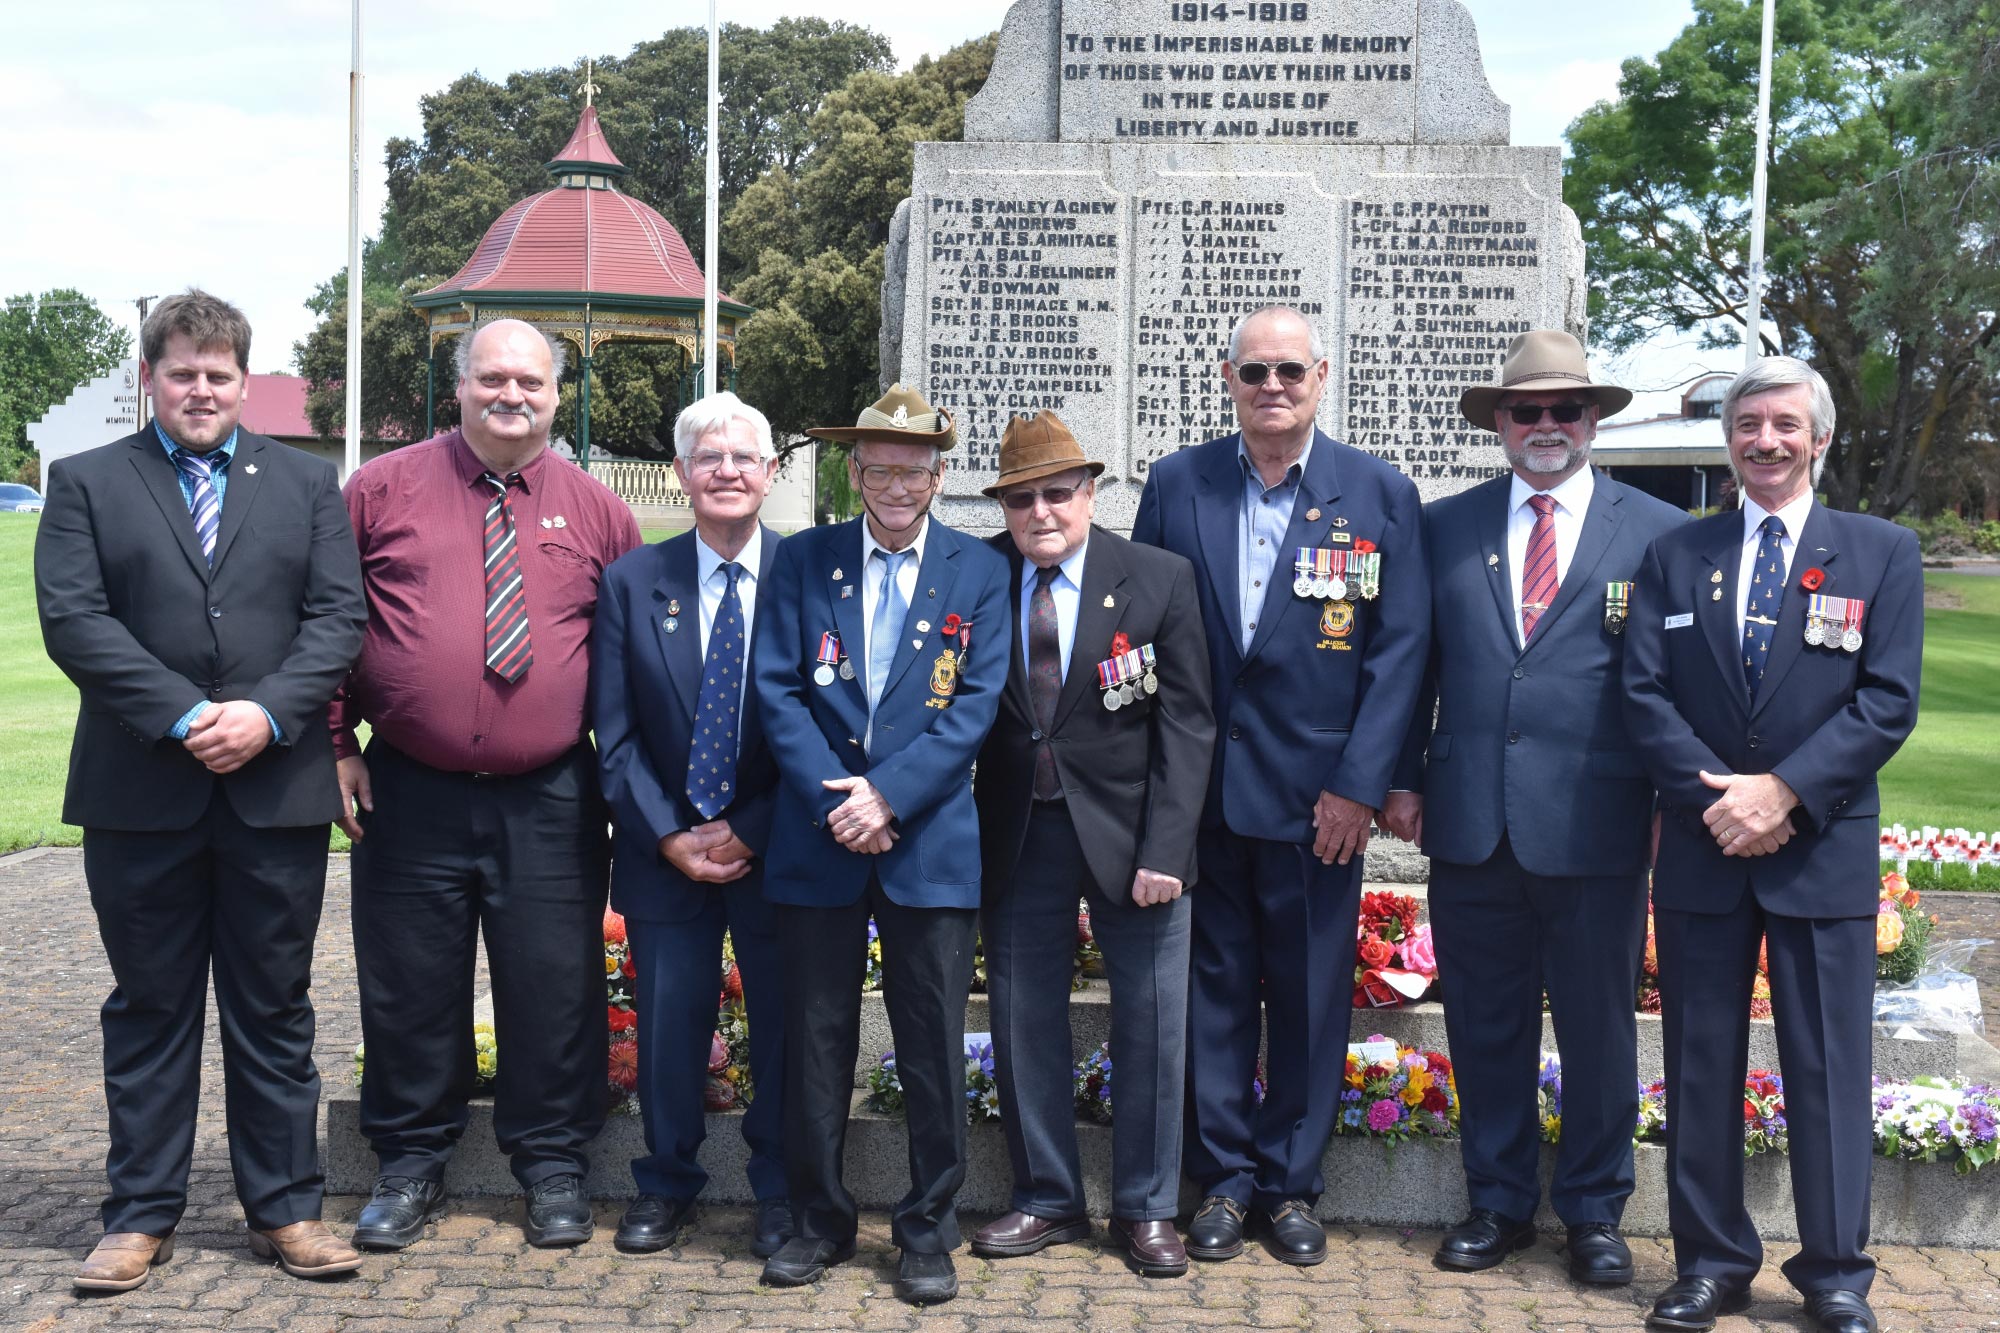 Chris Mathais with other veterans at a memorial